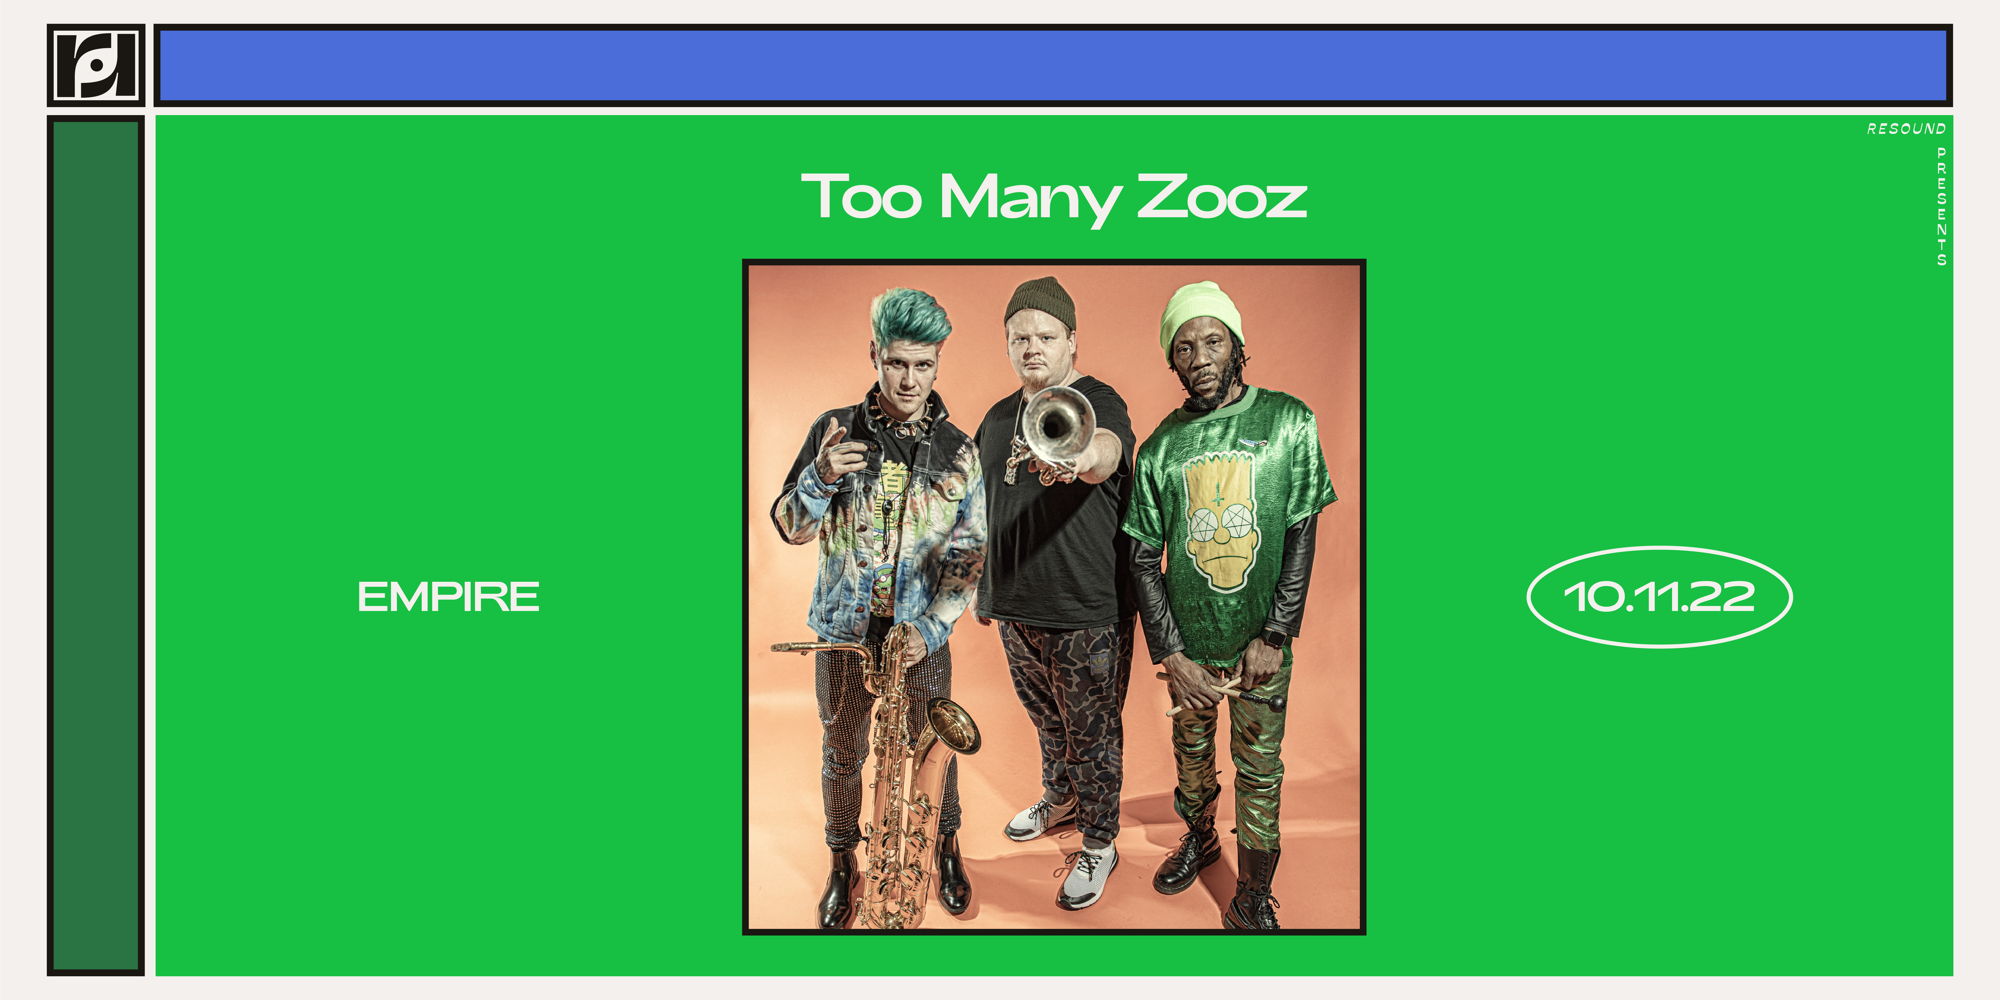 Resound Presents: Too Many Zooz @ Empire Garage on Oct 11th promotional image